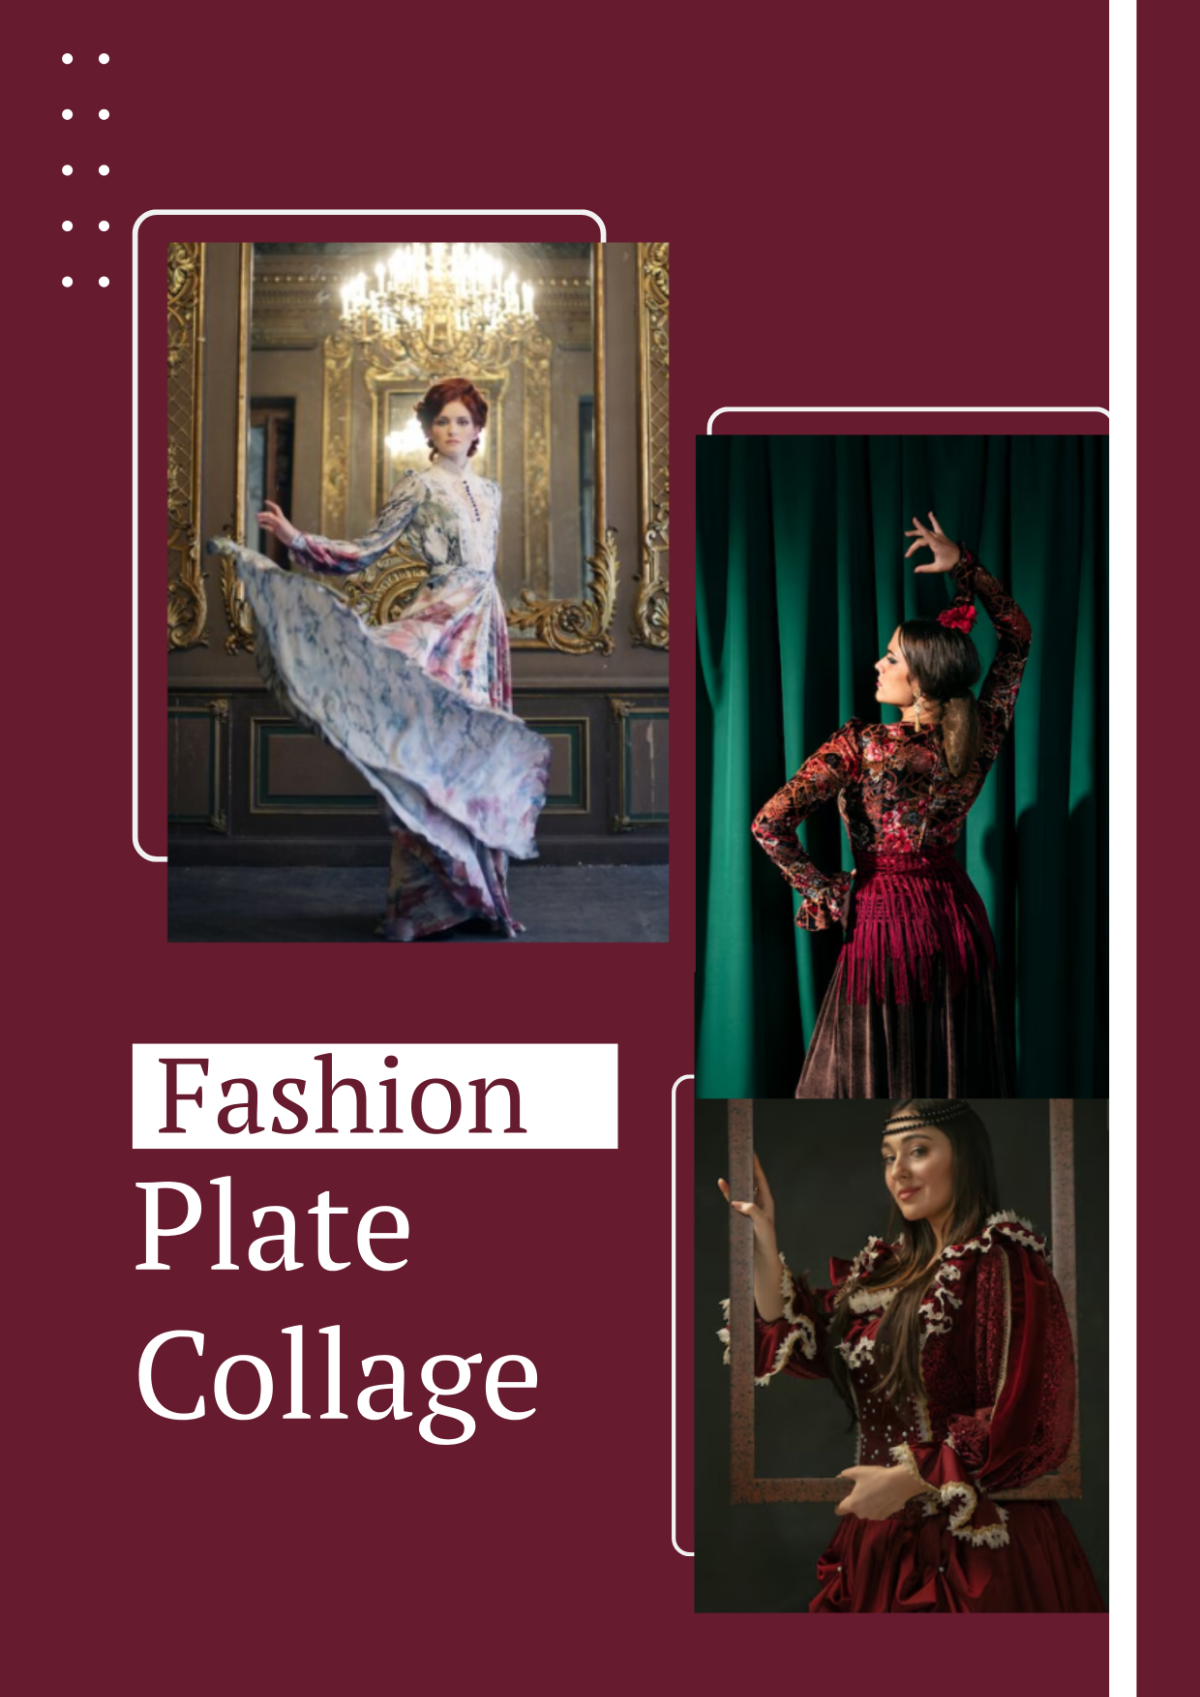 Fashion Plate Collage Template